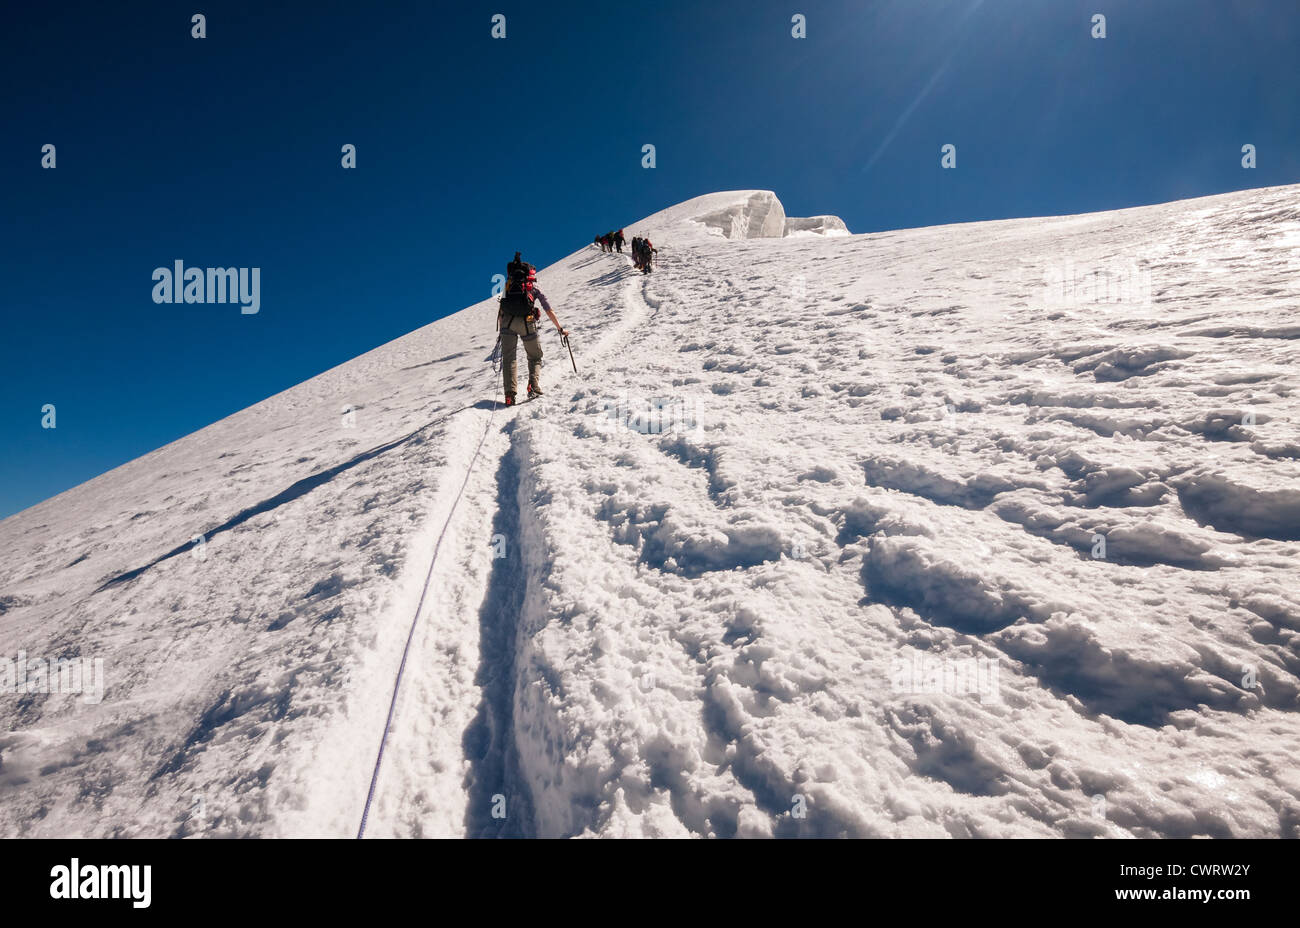 Climbers ascend the final steep section of snow that leads to the summit of Weissmies. Saas Grund Switzerland. Stock Photo